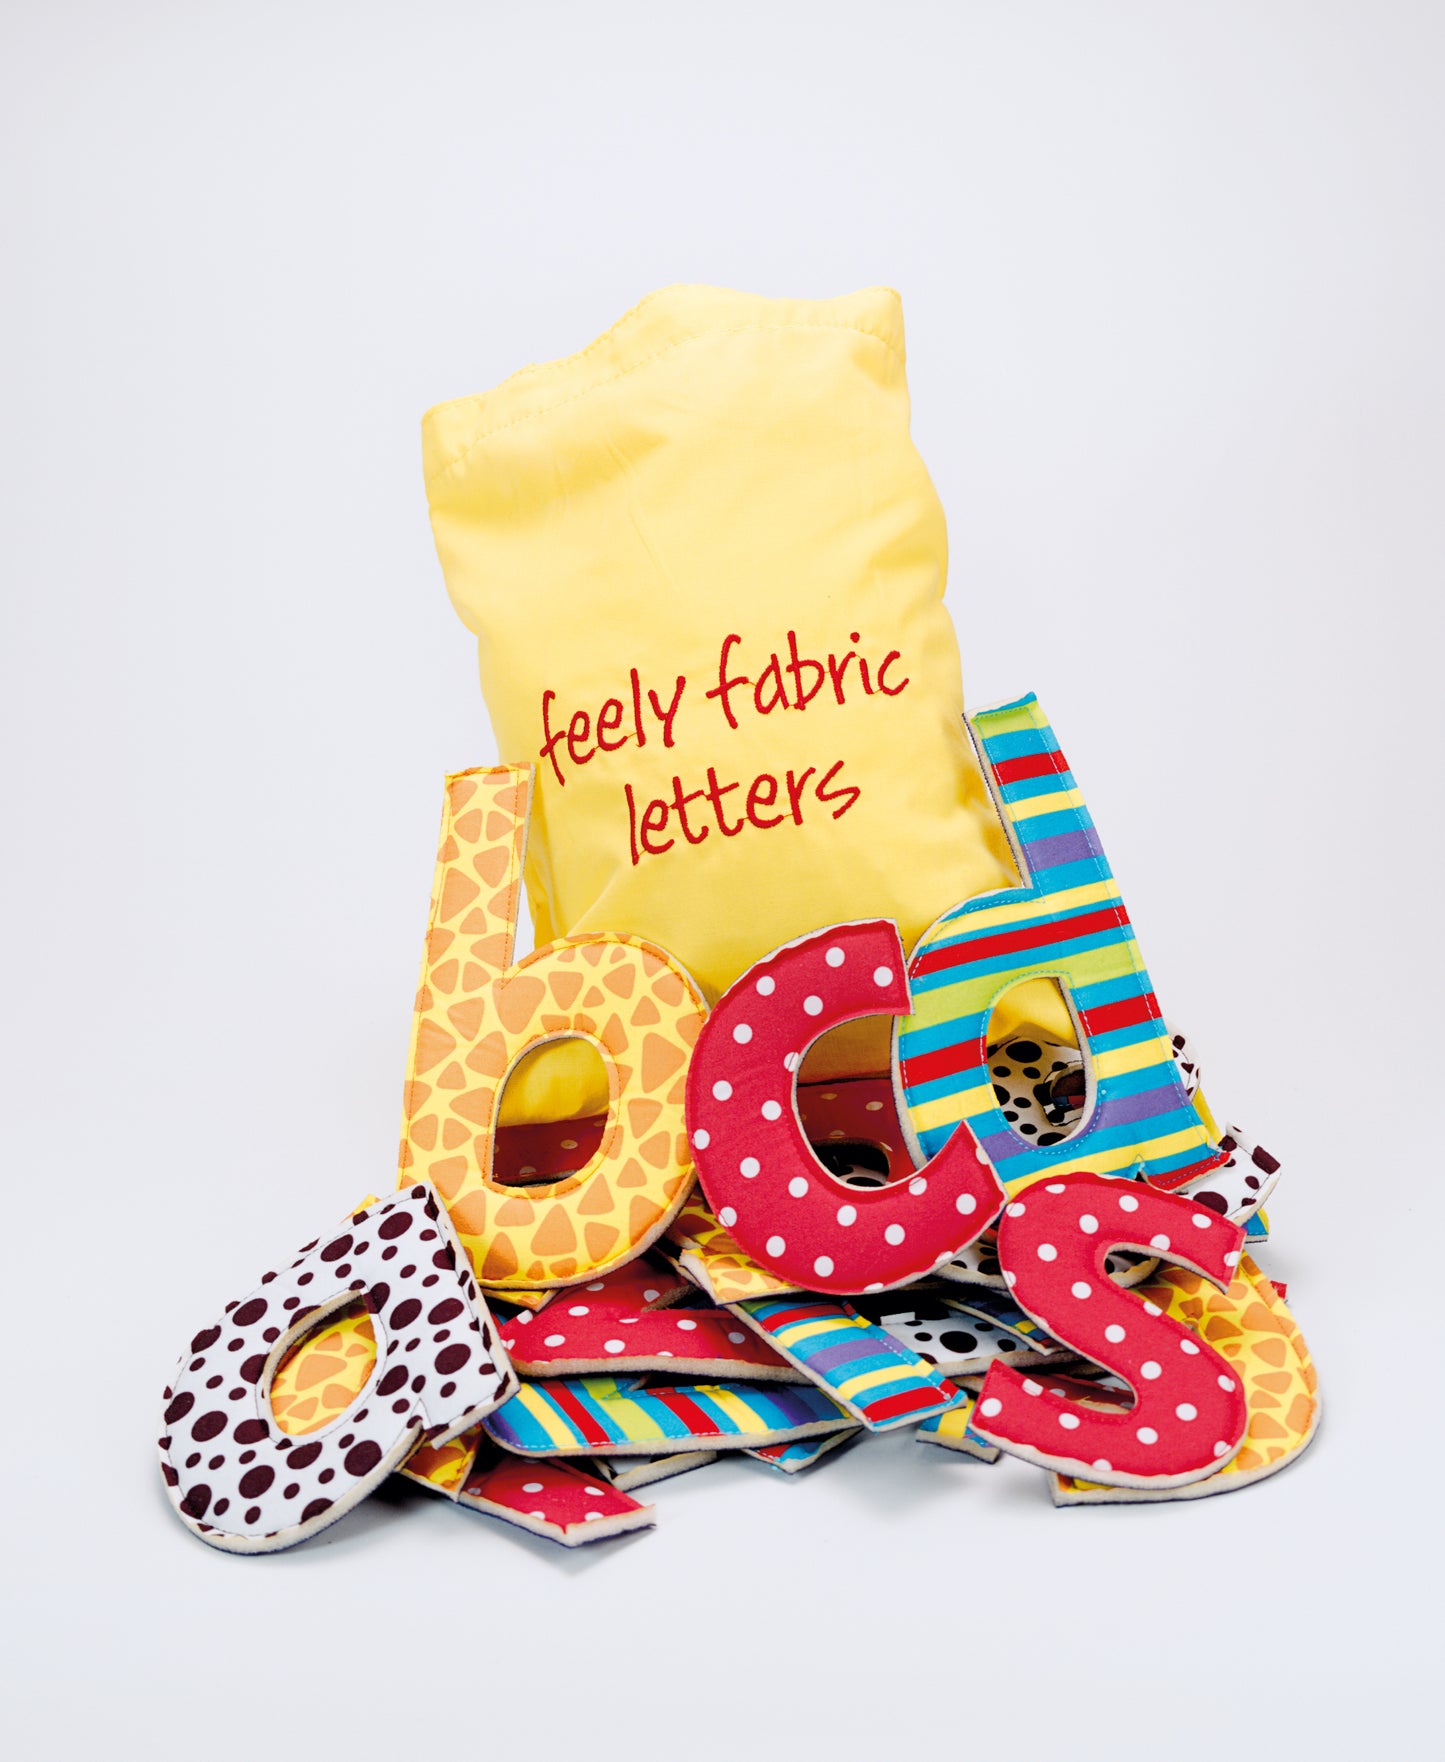 Feely Fabric Letters (26 grote stoffen letters)